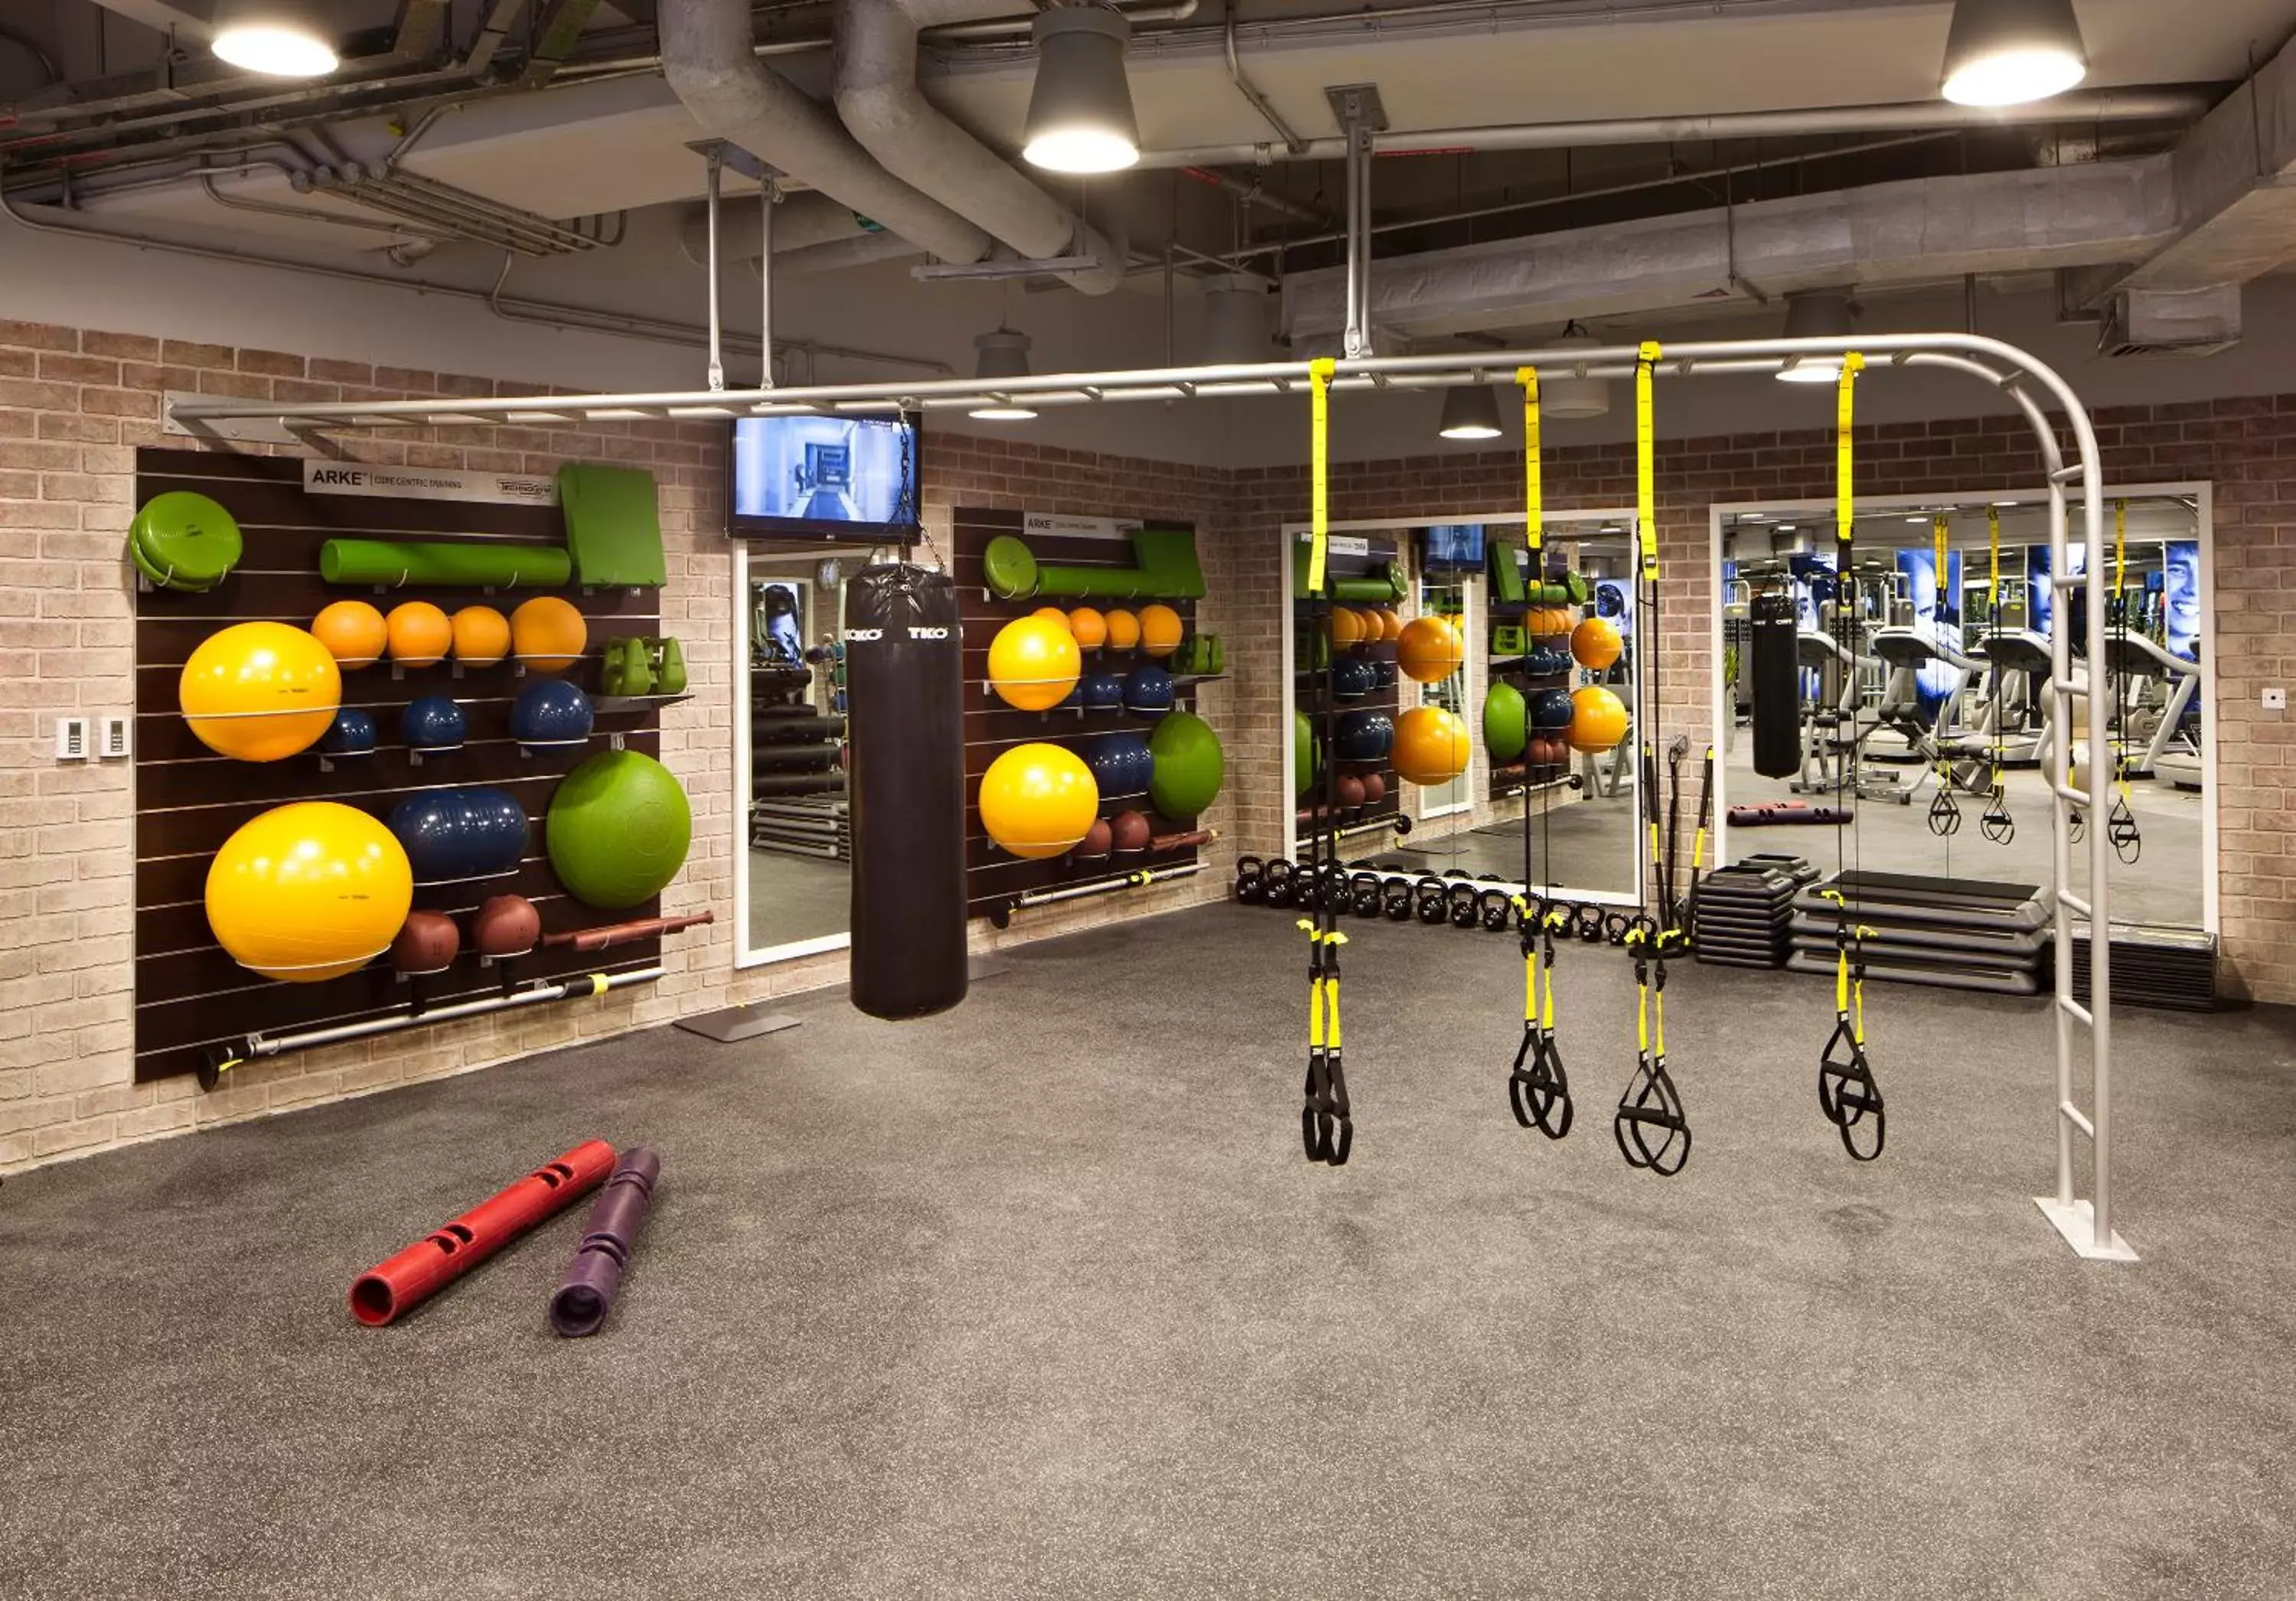 Fitness centre/facilities, Fitness Center/Facilities in Jumeirah Emirates Towers